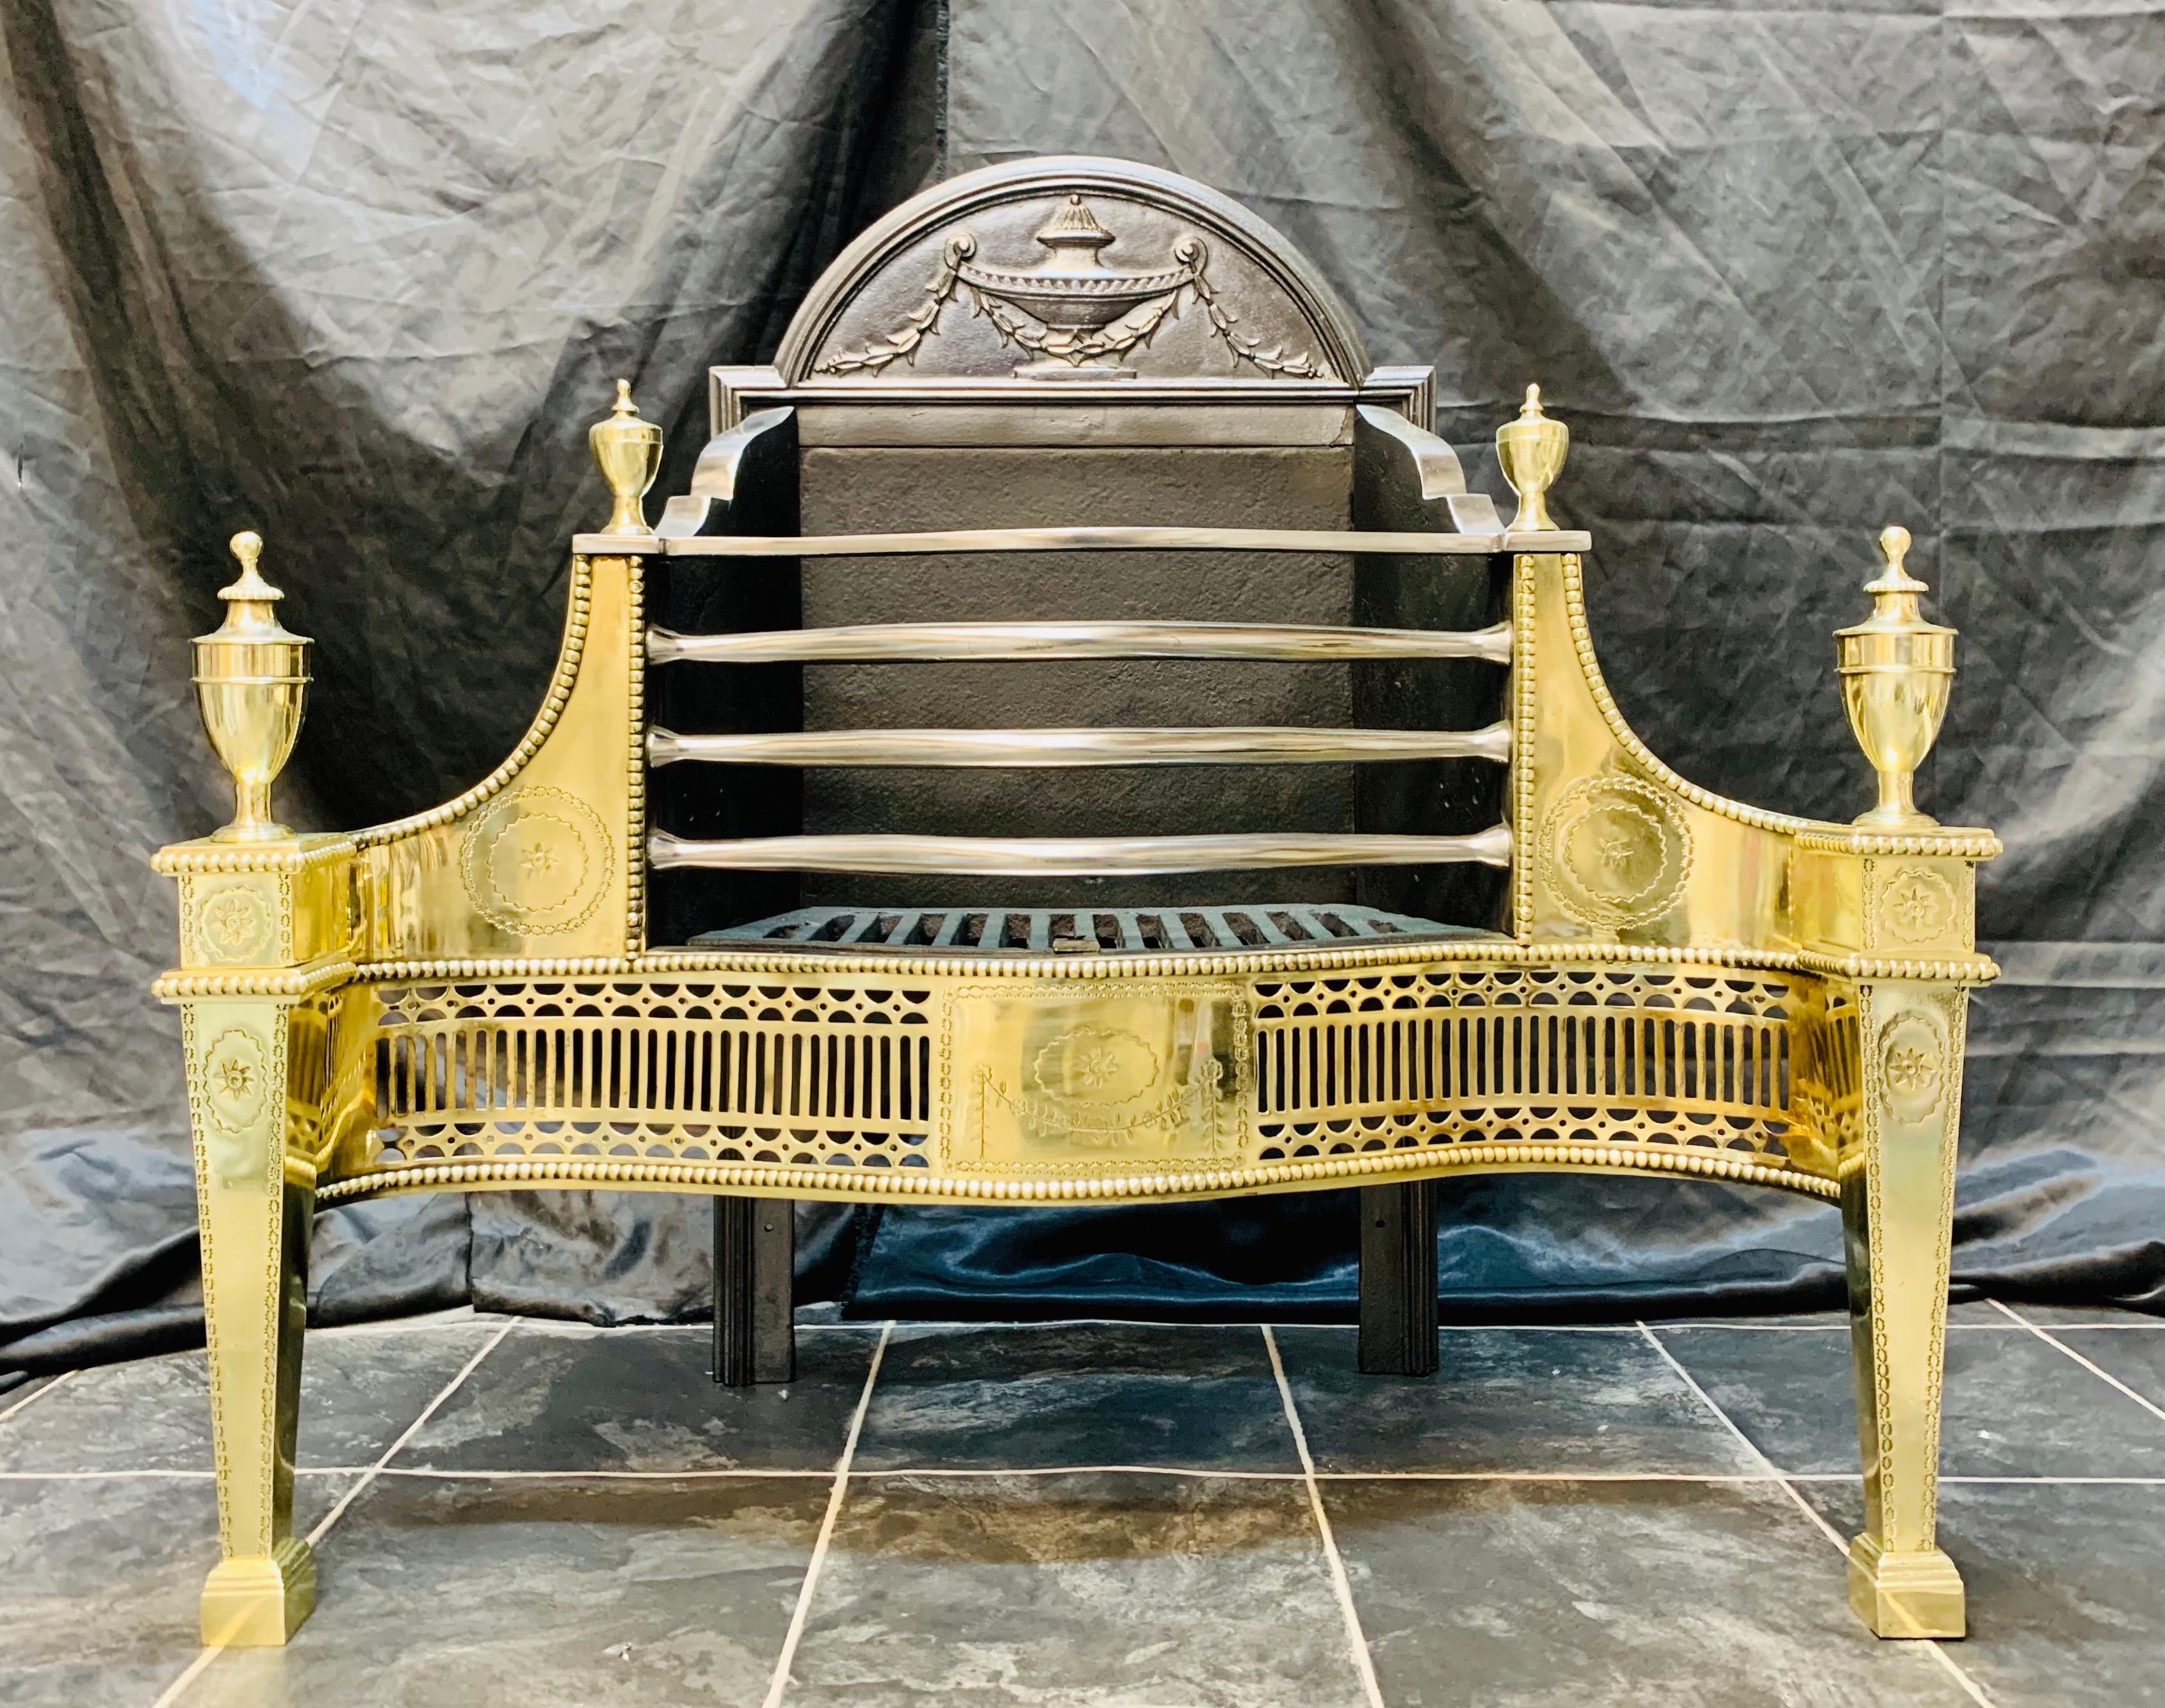 A Thomas Elsley, polished brass and cast iron Georgian style fire basket. The arched fireback centred by an urn draped with bellflowers above a four barred curved grate, with etched shoulders, is framed by beading and surmounted by a pair of lidded